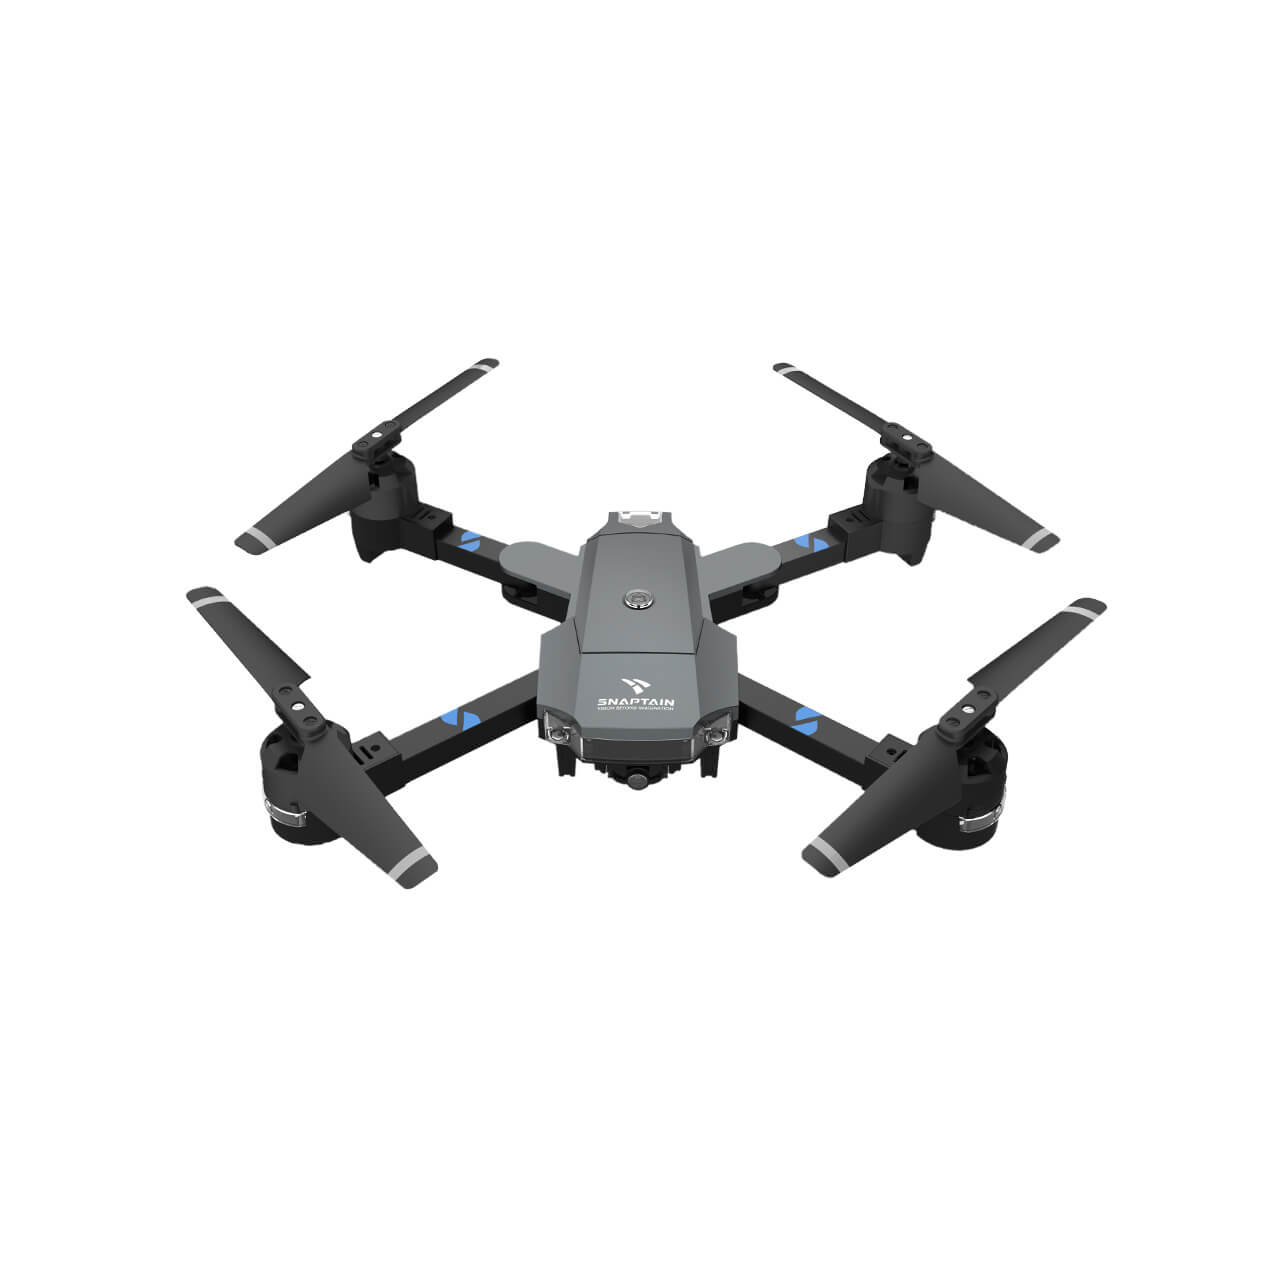 SNAPTAIN SP7100 4K GPS Drone with UHD Camera - Snaptain